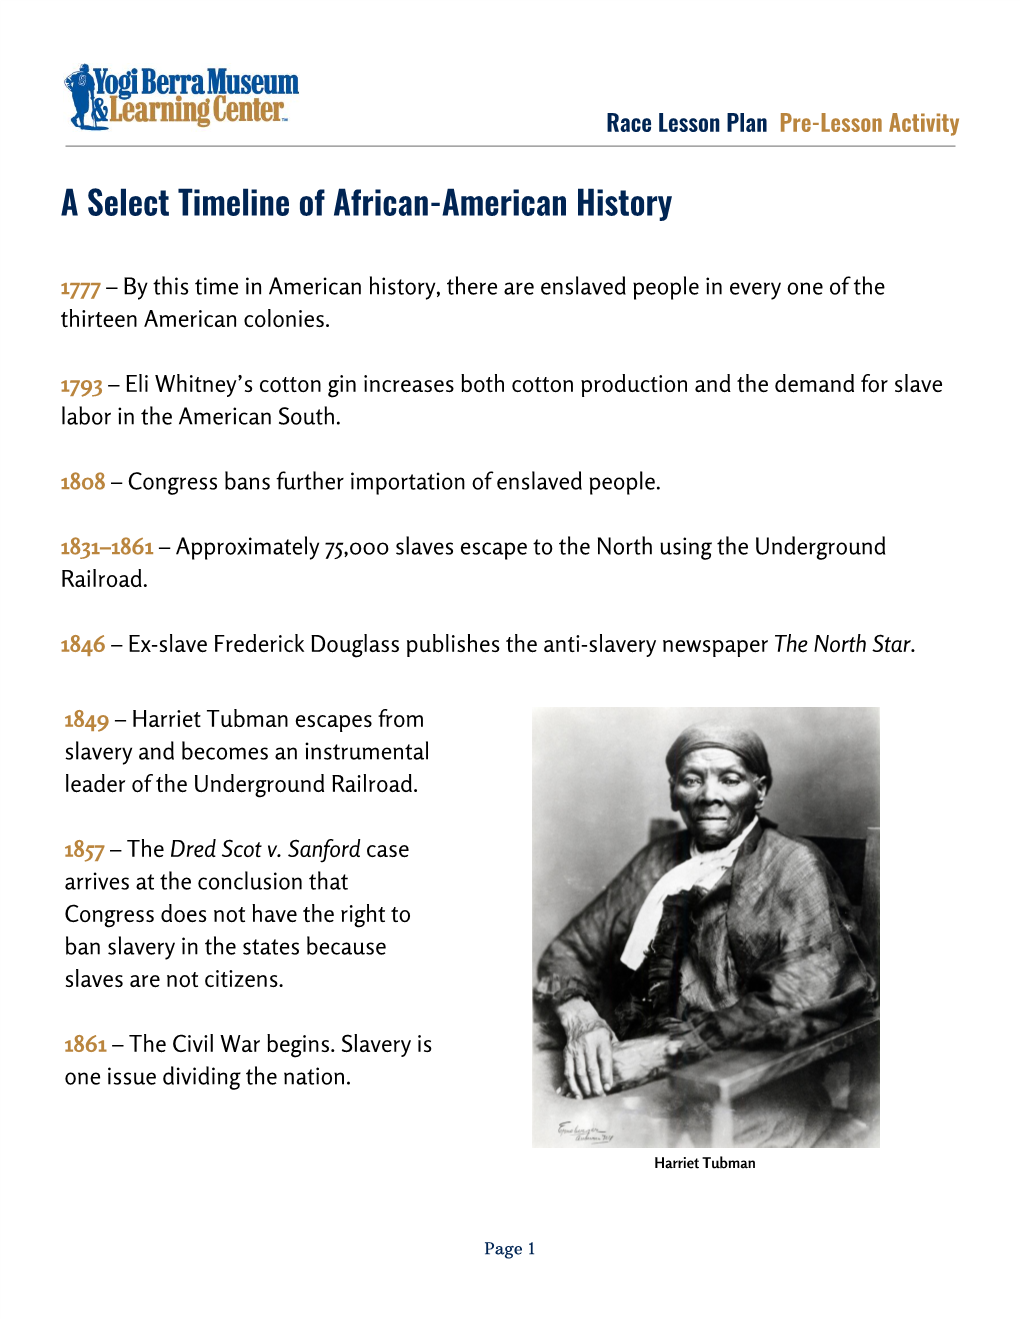 Pre-Lesson Activity: a Select Timeline of African-American History